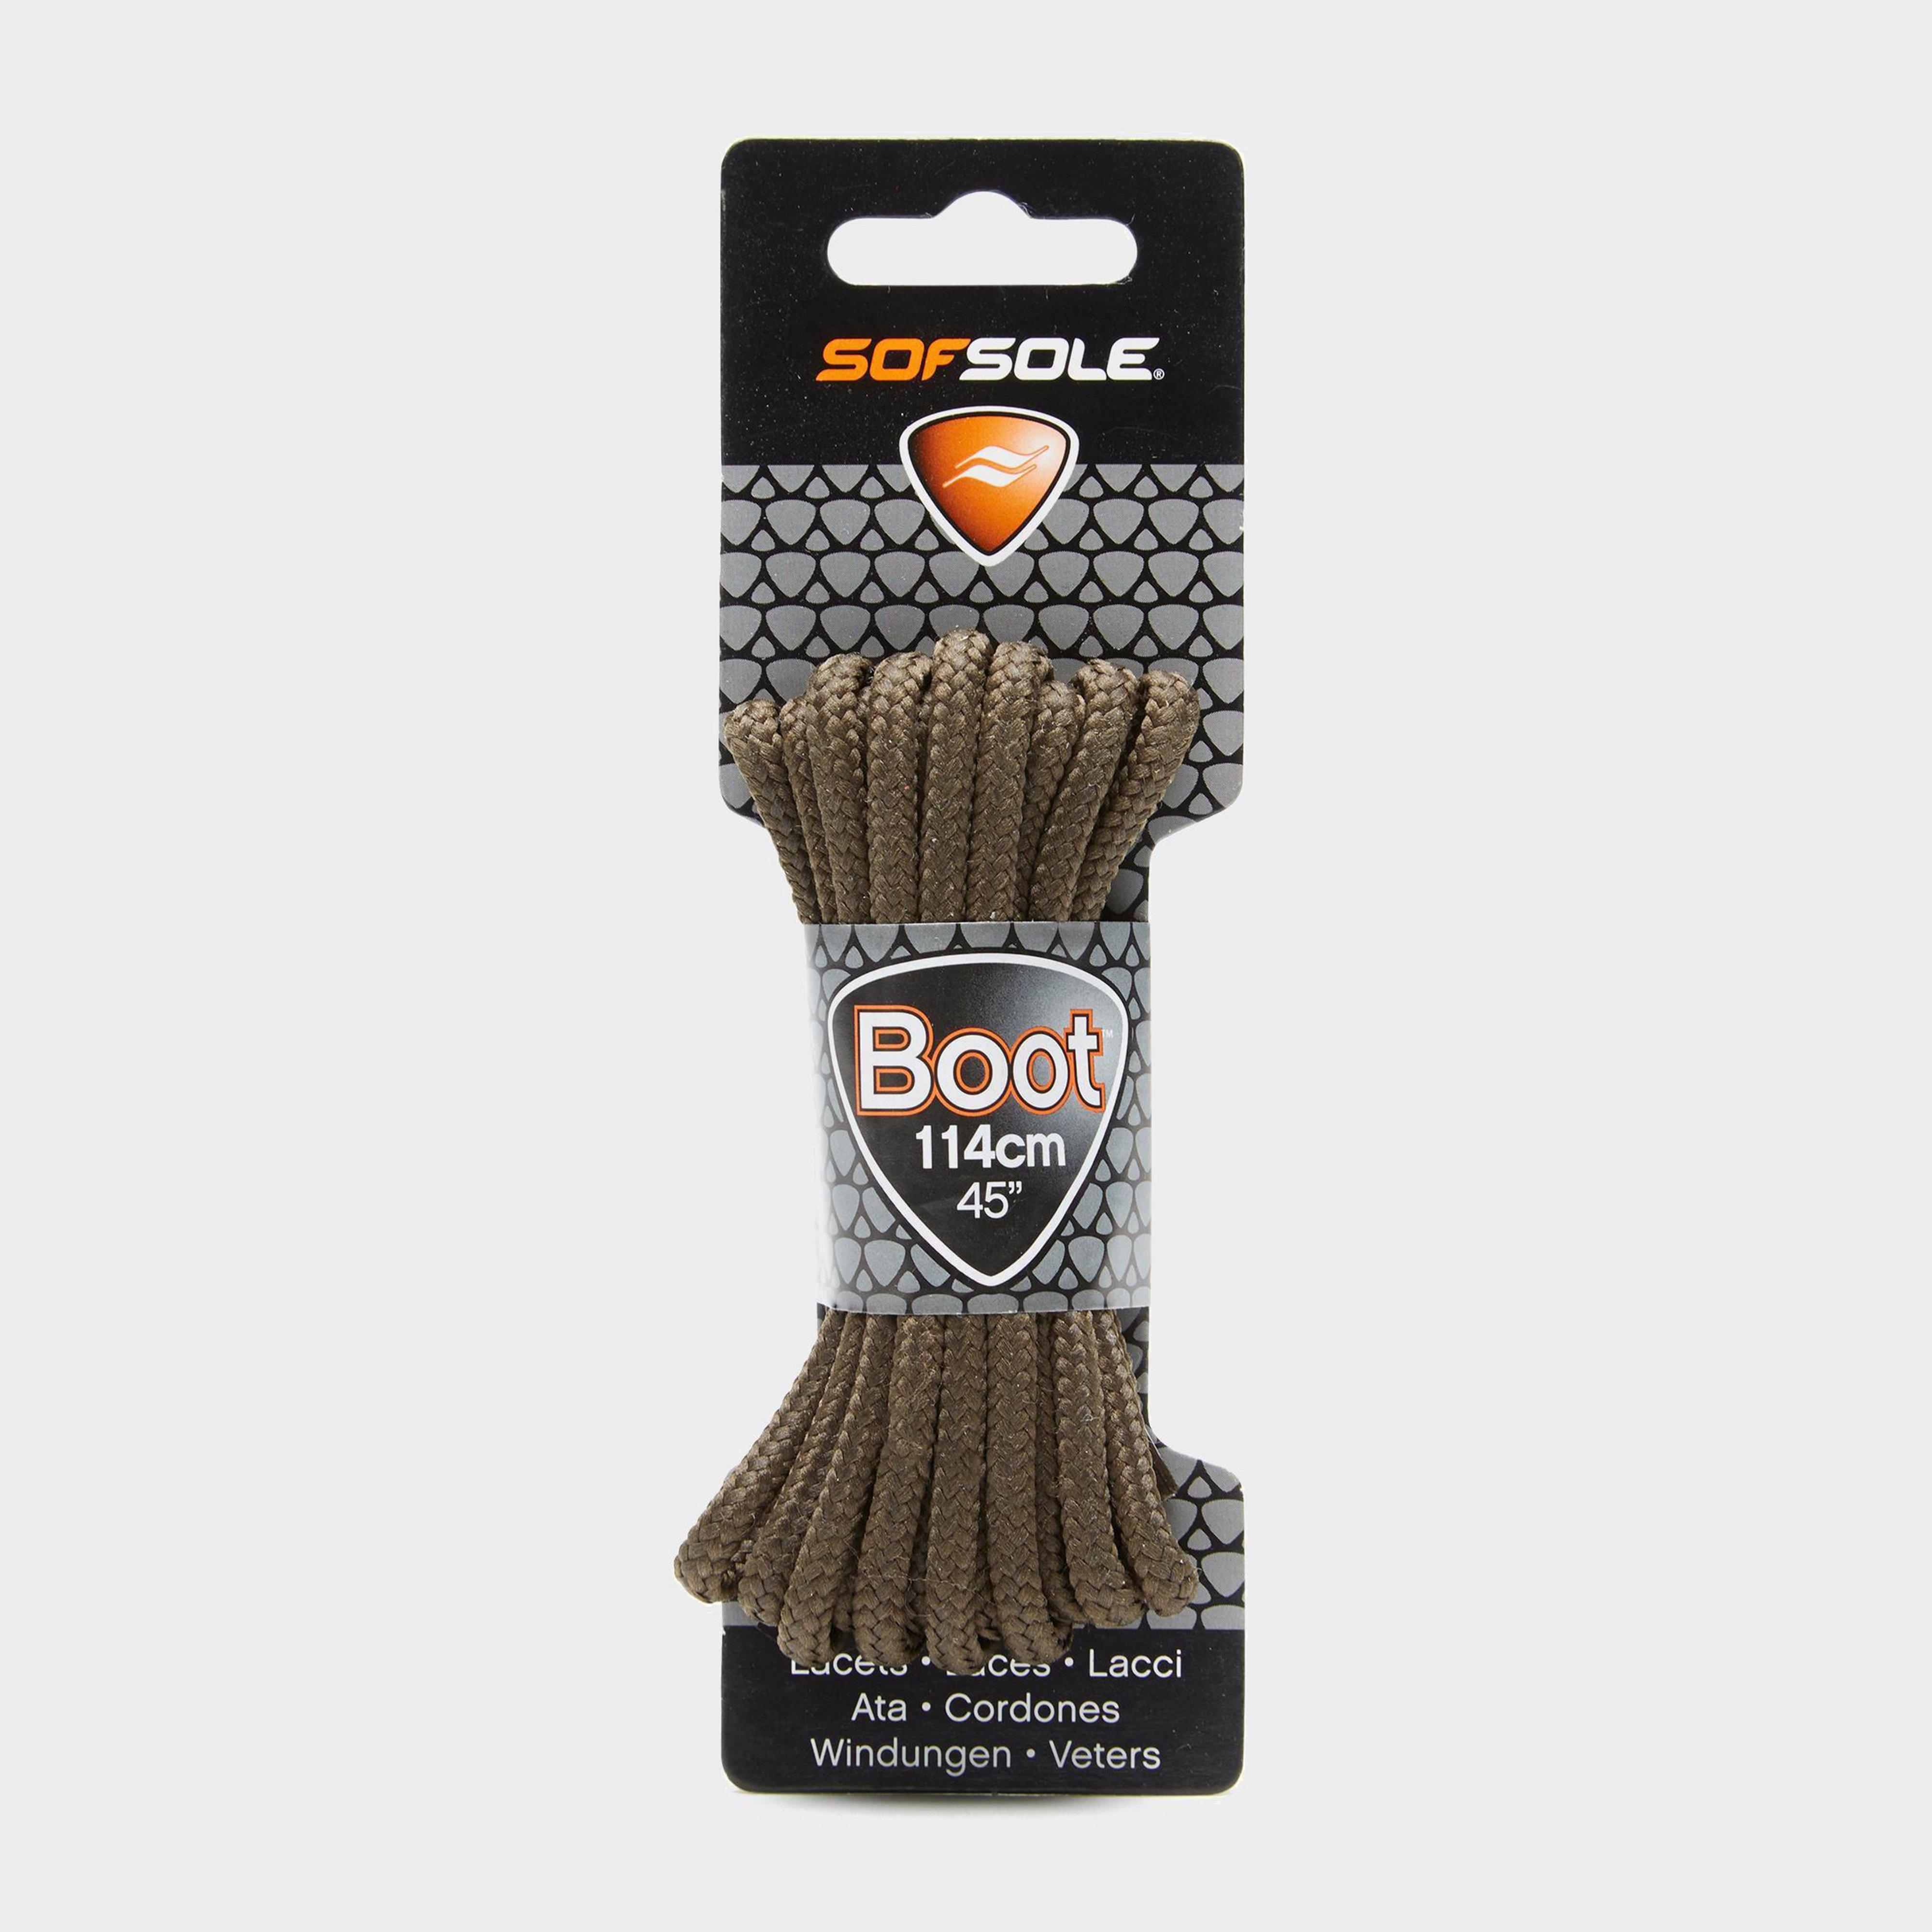 Sof Sole Wax Boot Laces - 114cm - Brown/dbn  Brown/dbn